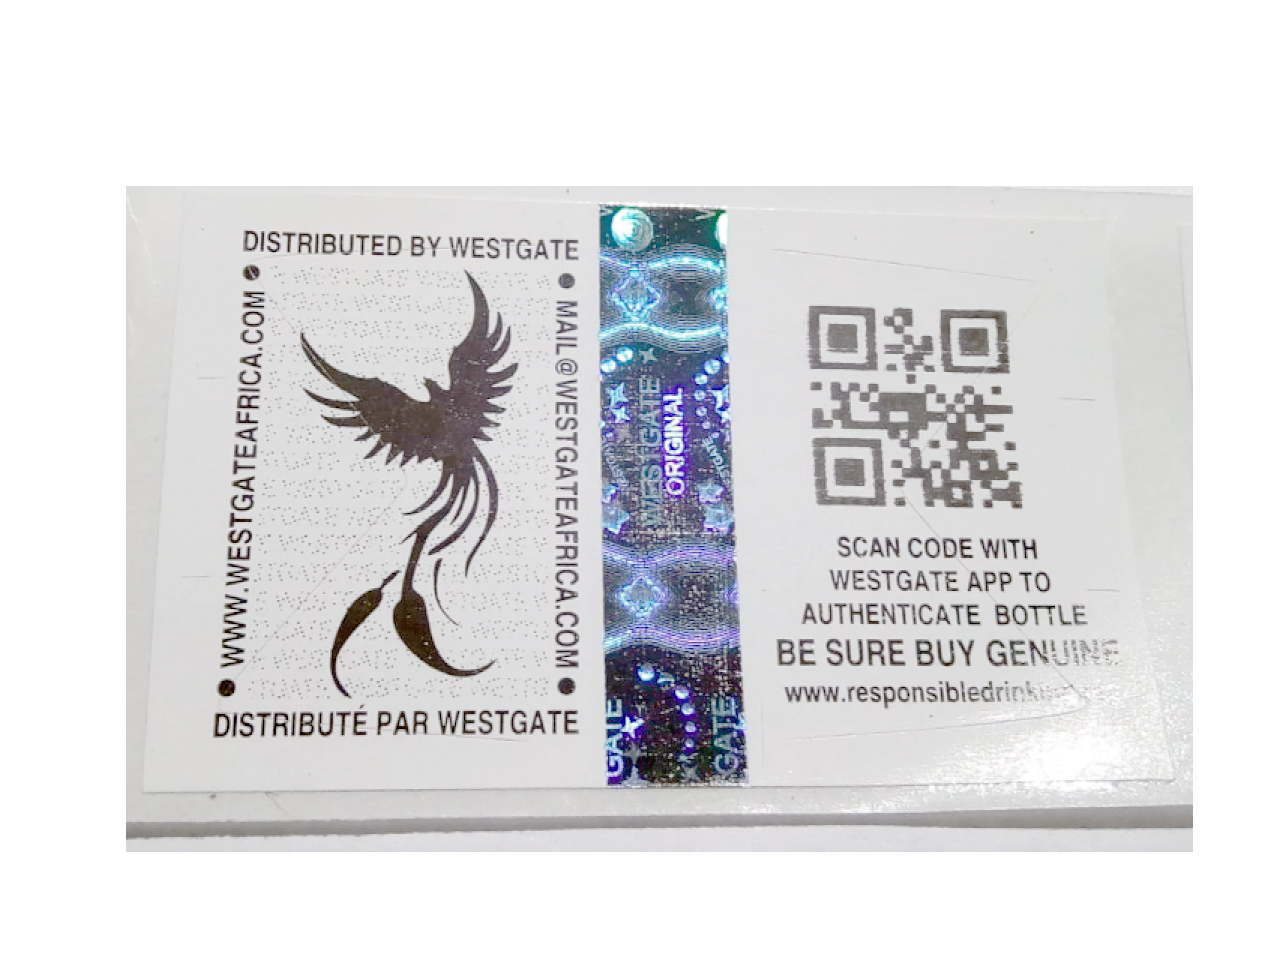 QR Code with Holographic strip